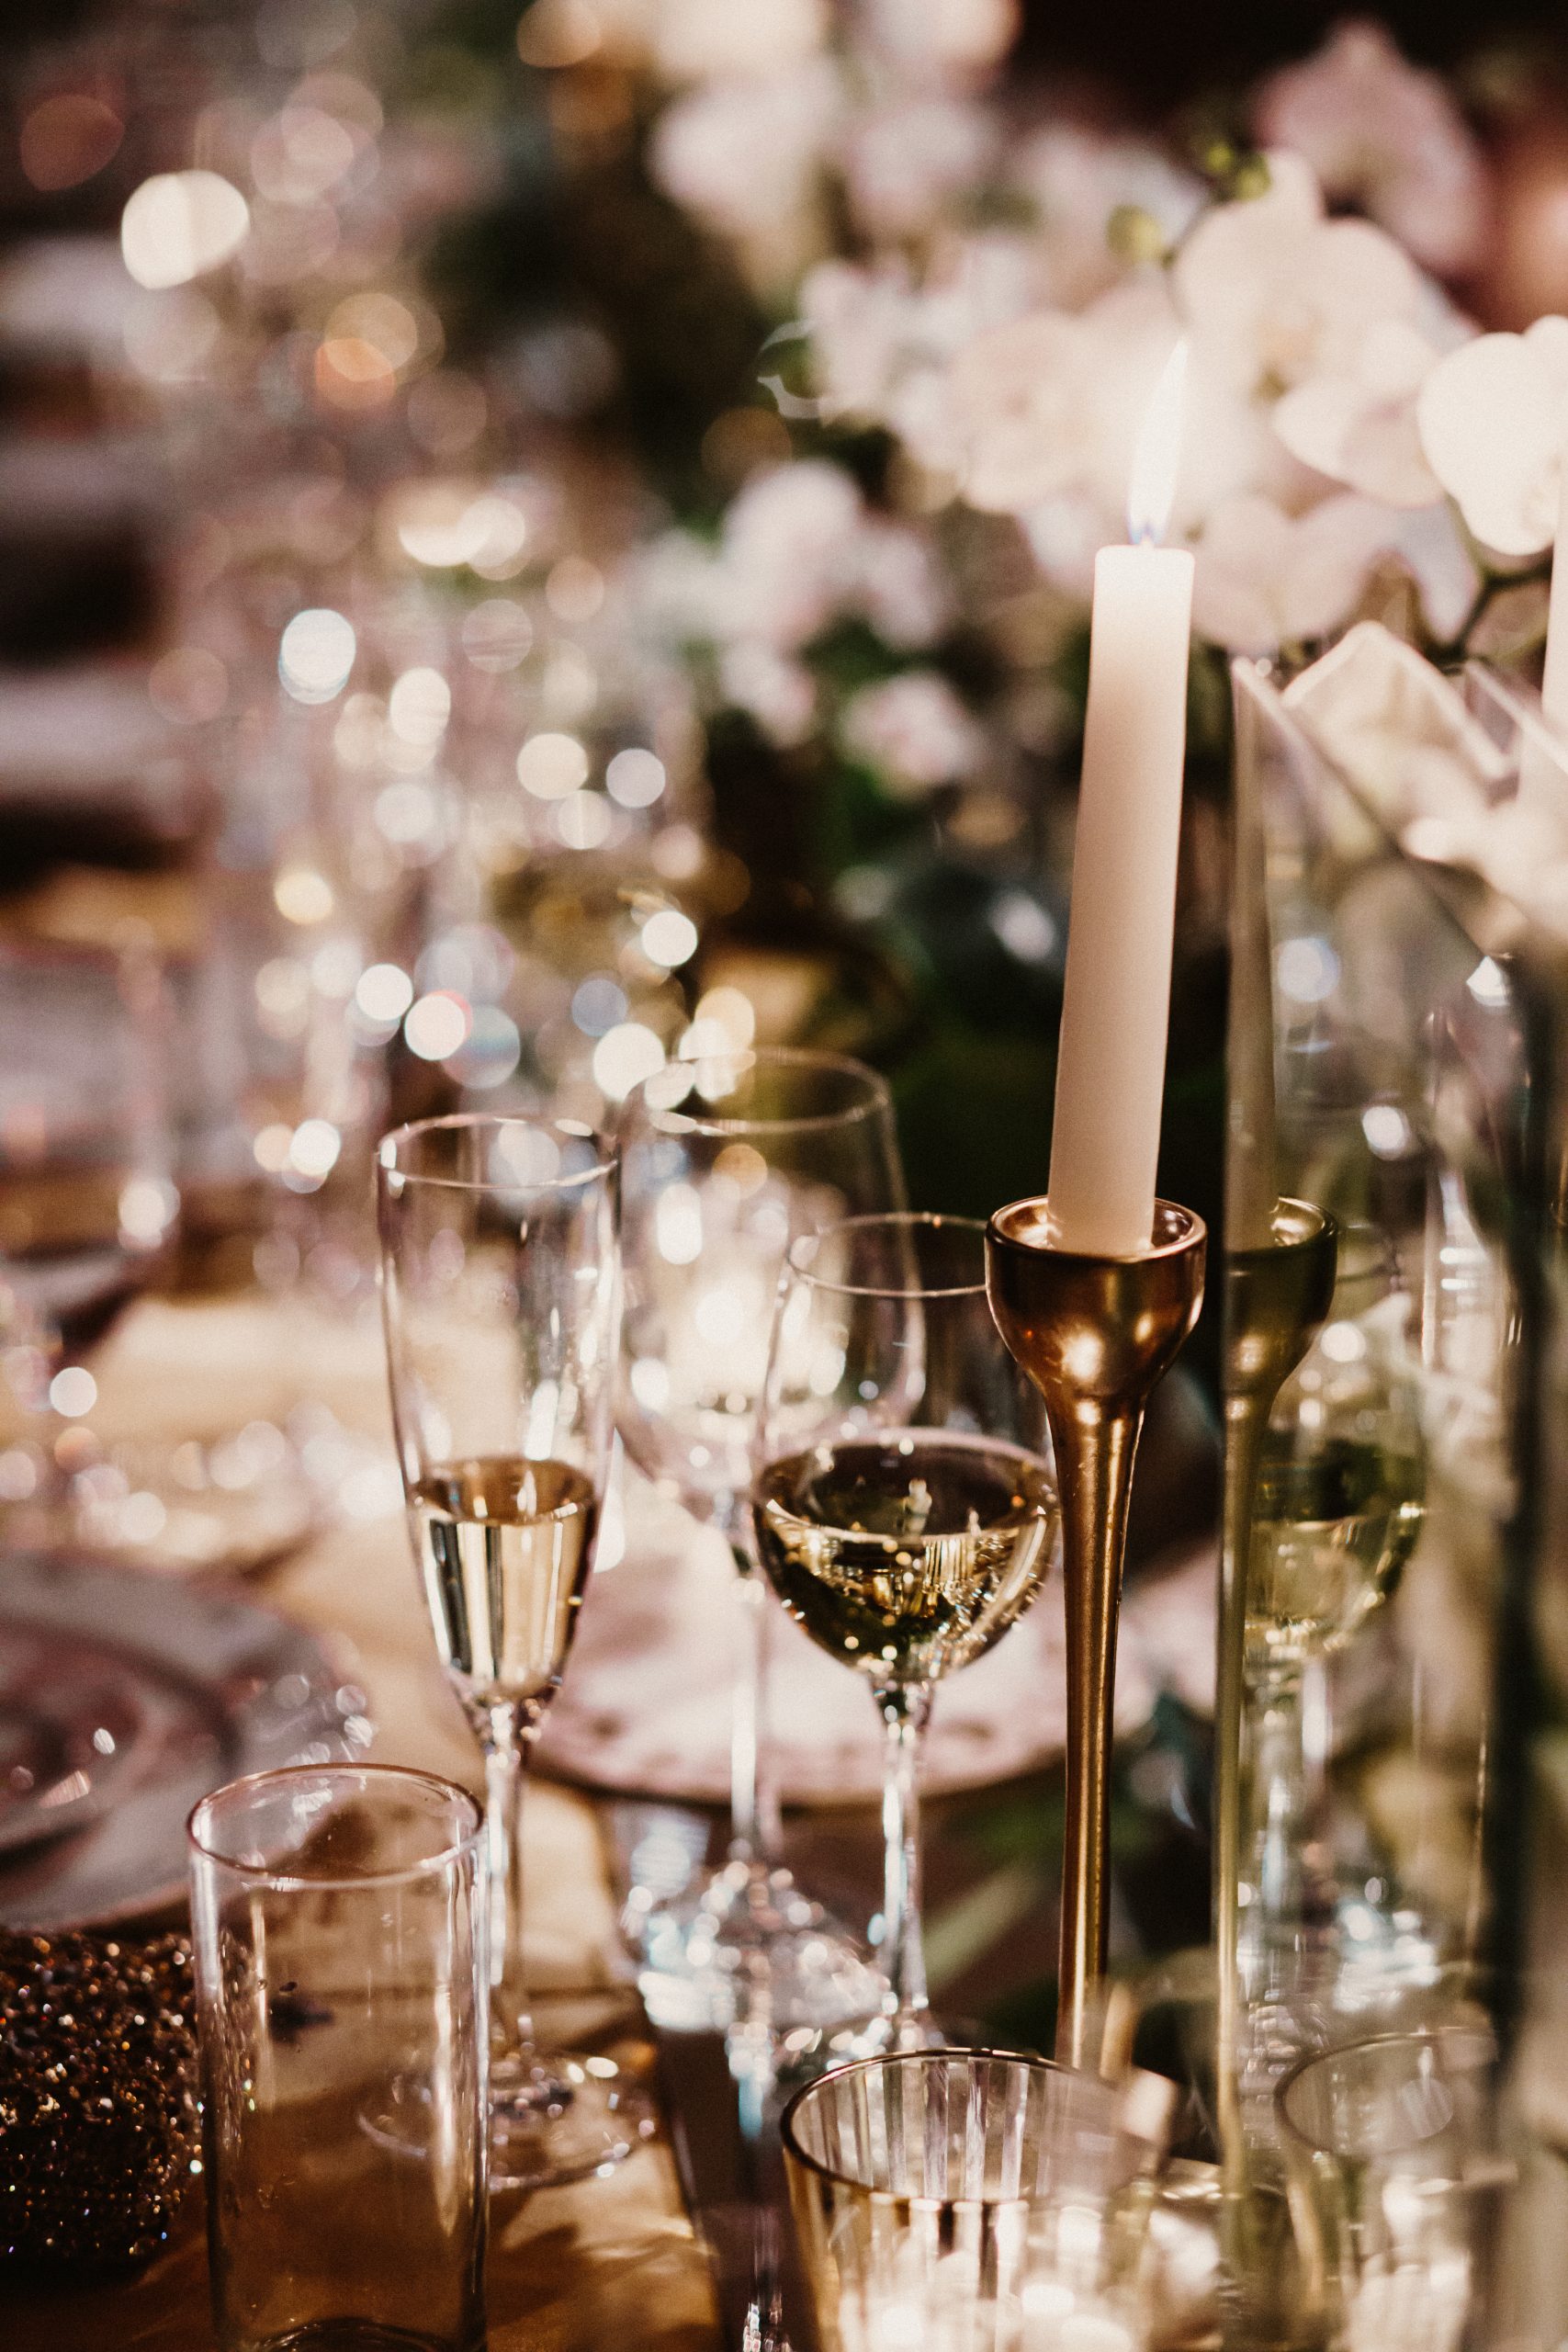 Glasses of champagne stand on a festive table